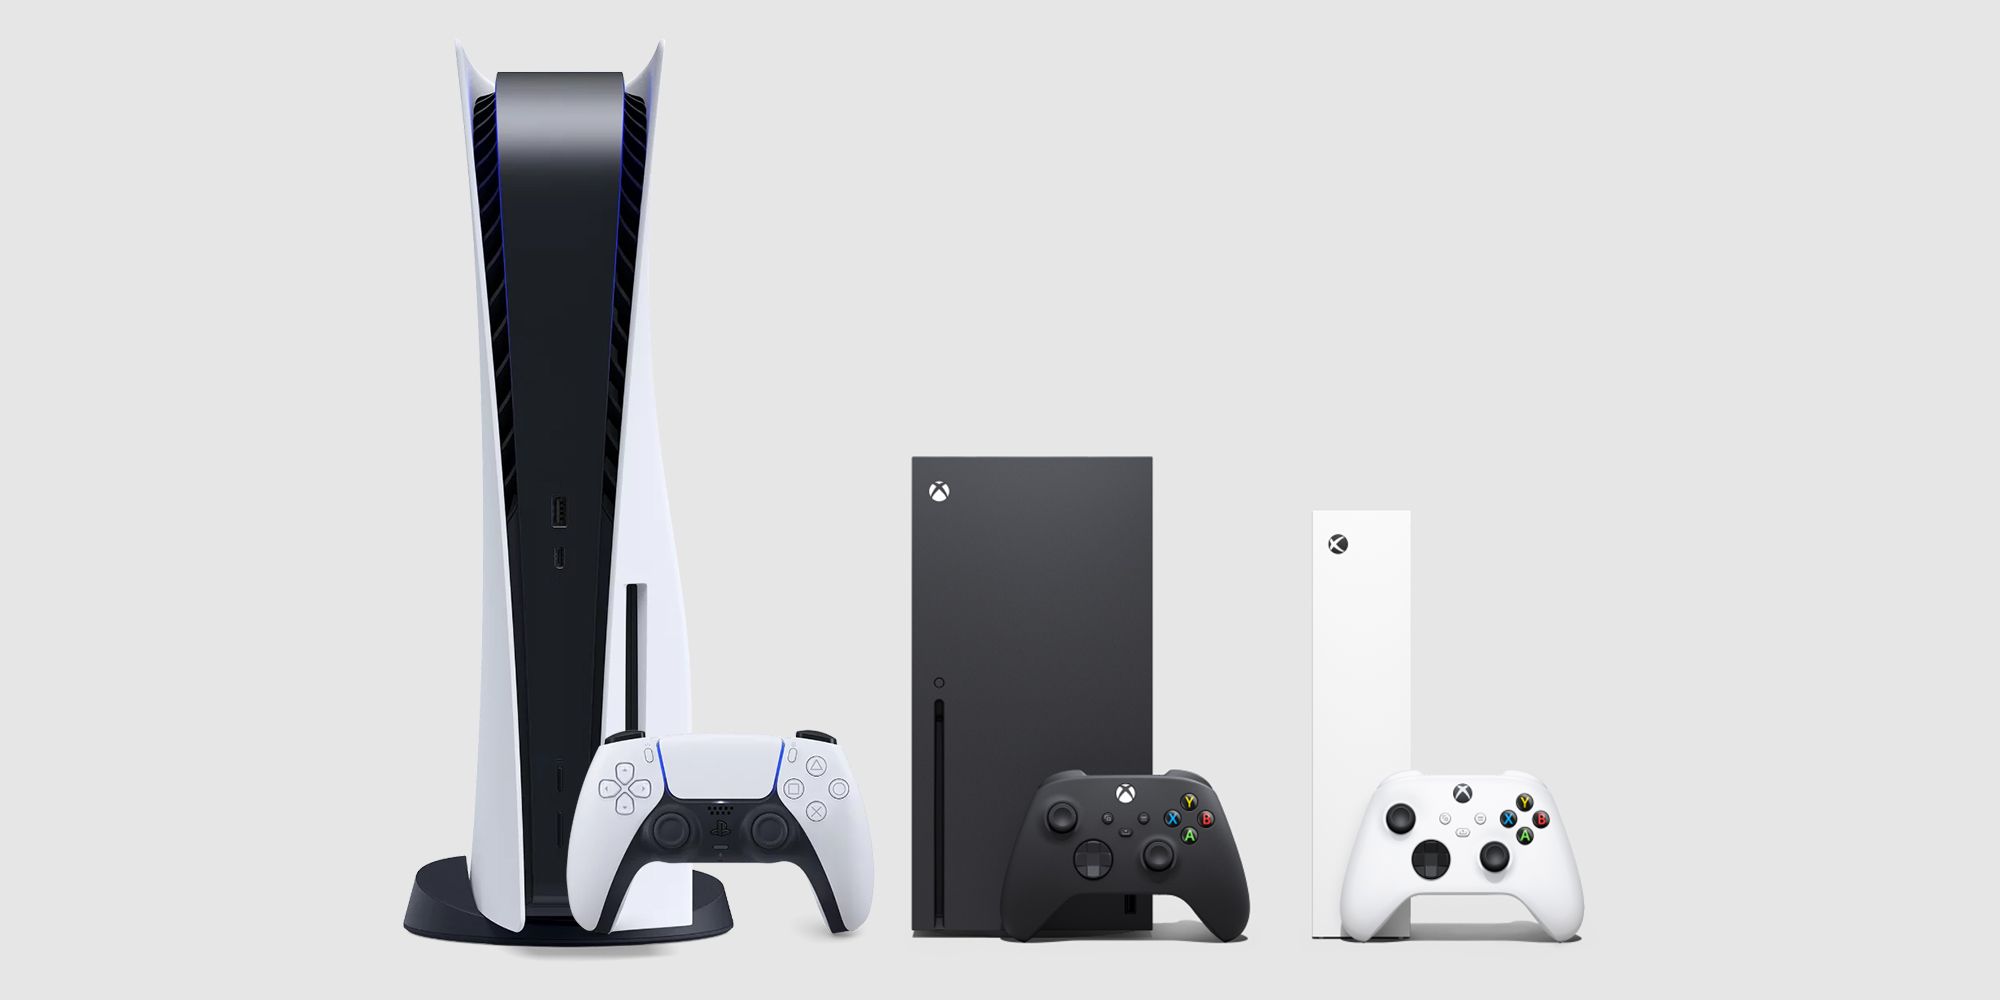 PlayStation 5 PS5 dwarfing Xbox Series X and S